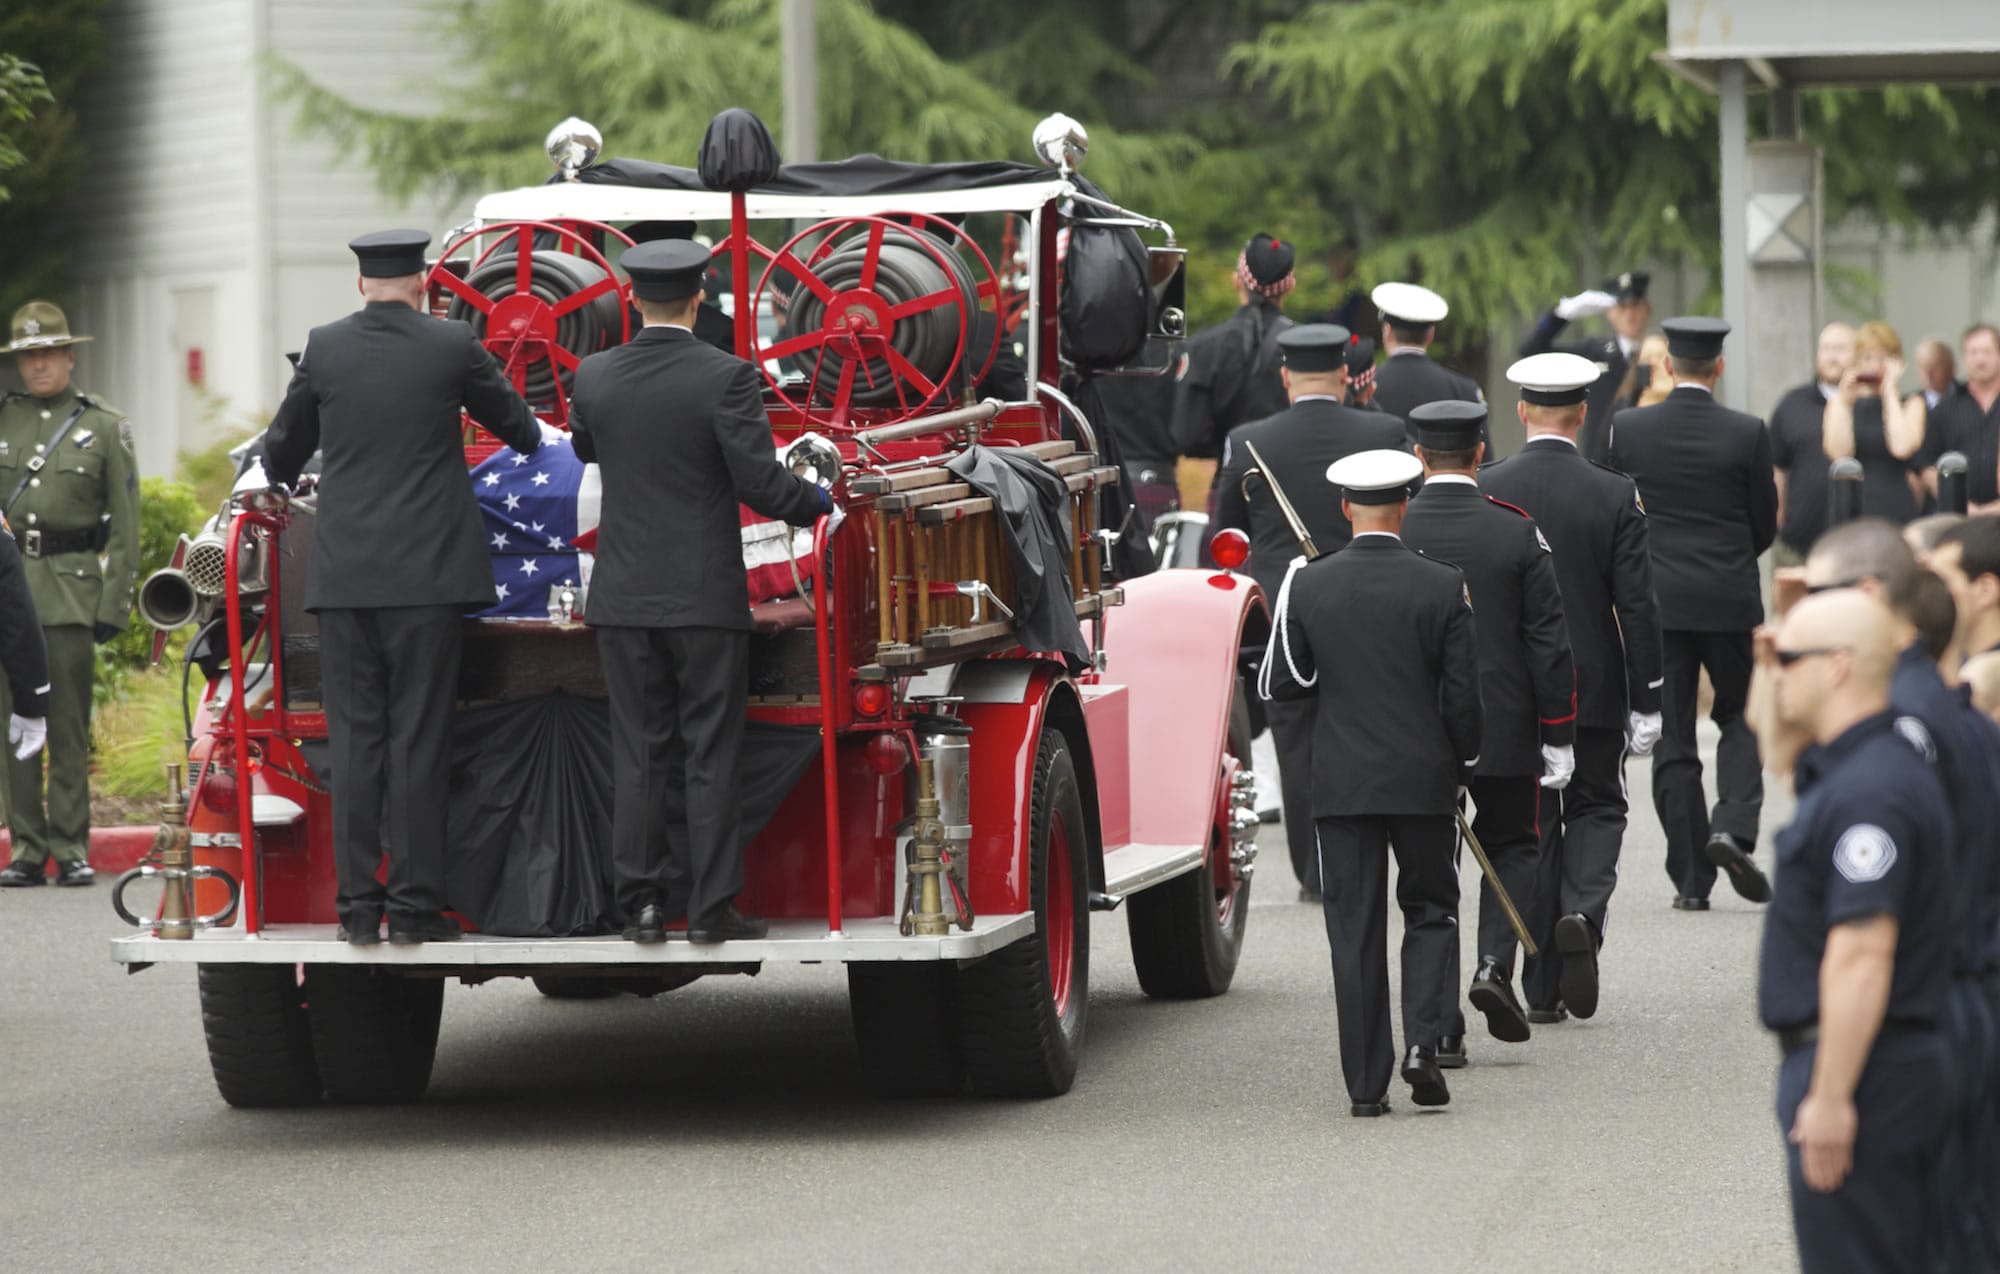 Firefighter Robert W. Hamel's casket was placed at the rear of an antique fire rig, Engine 0, and driven from downtown Vancouver to Crossroads Community Church, where his service was held.